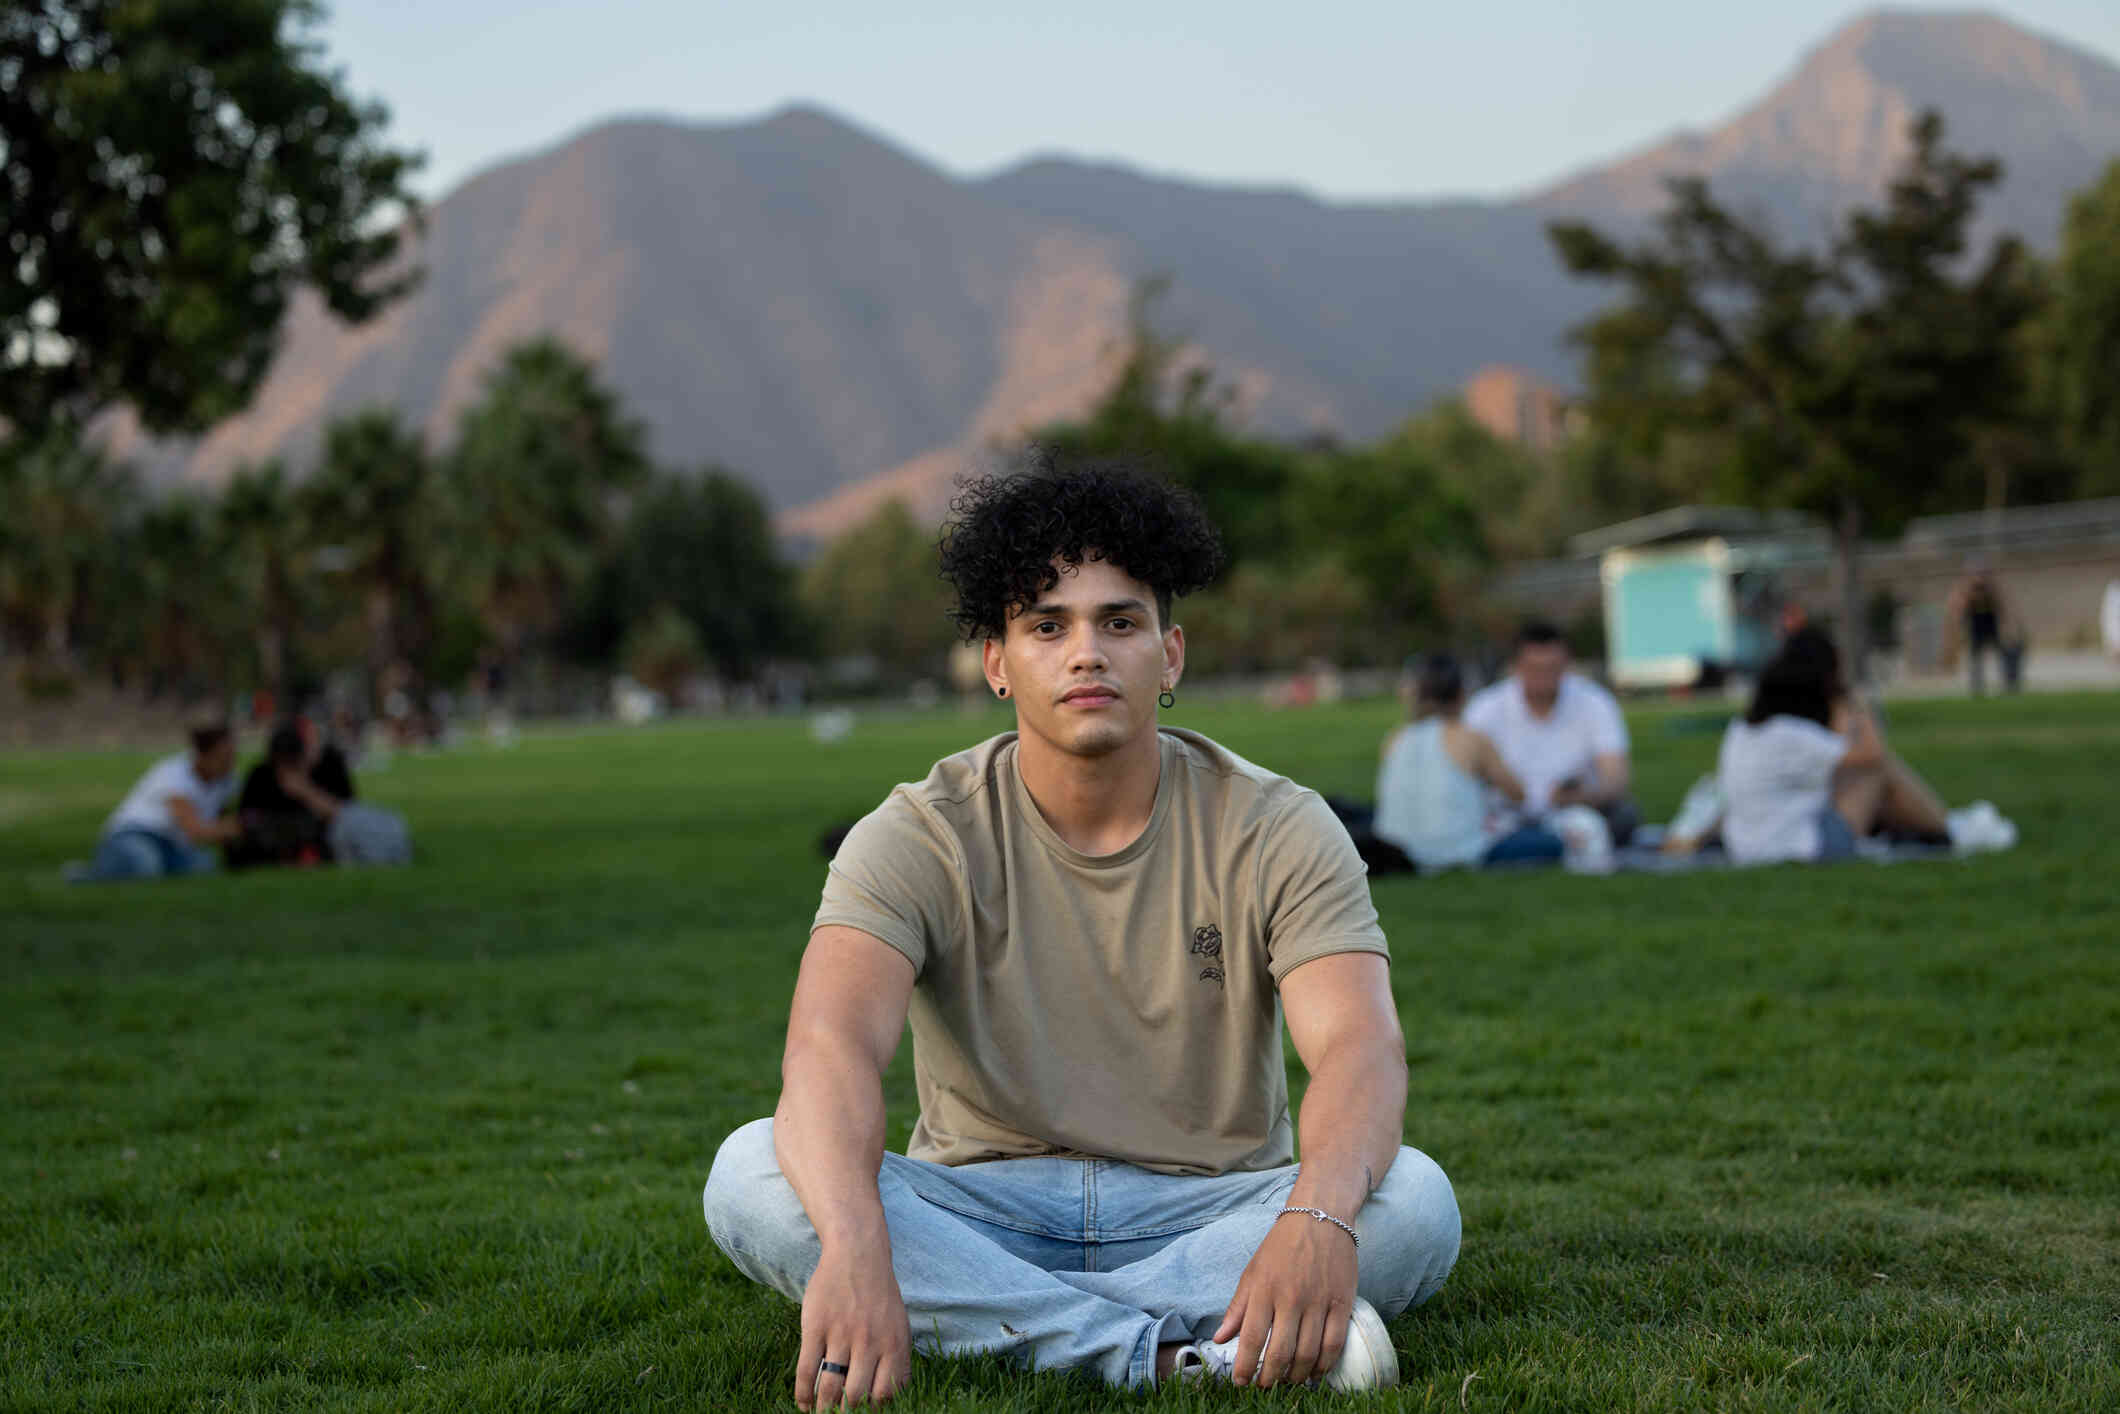 A man in a tab shirt sits cross-legged on the grass in a courtyard  and looks at the camera with a serious expression.